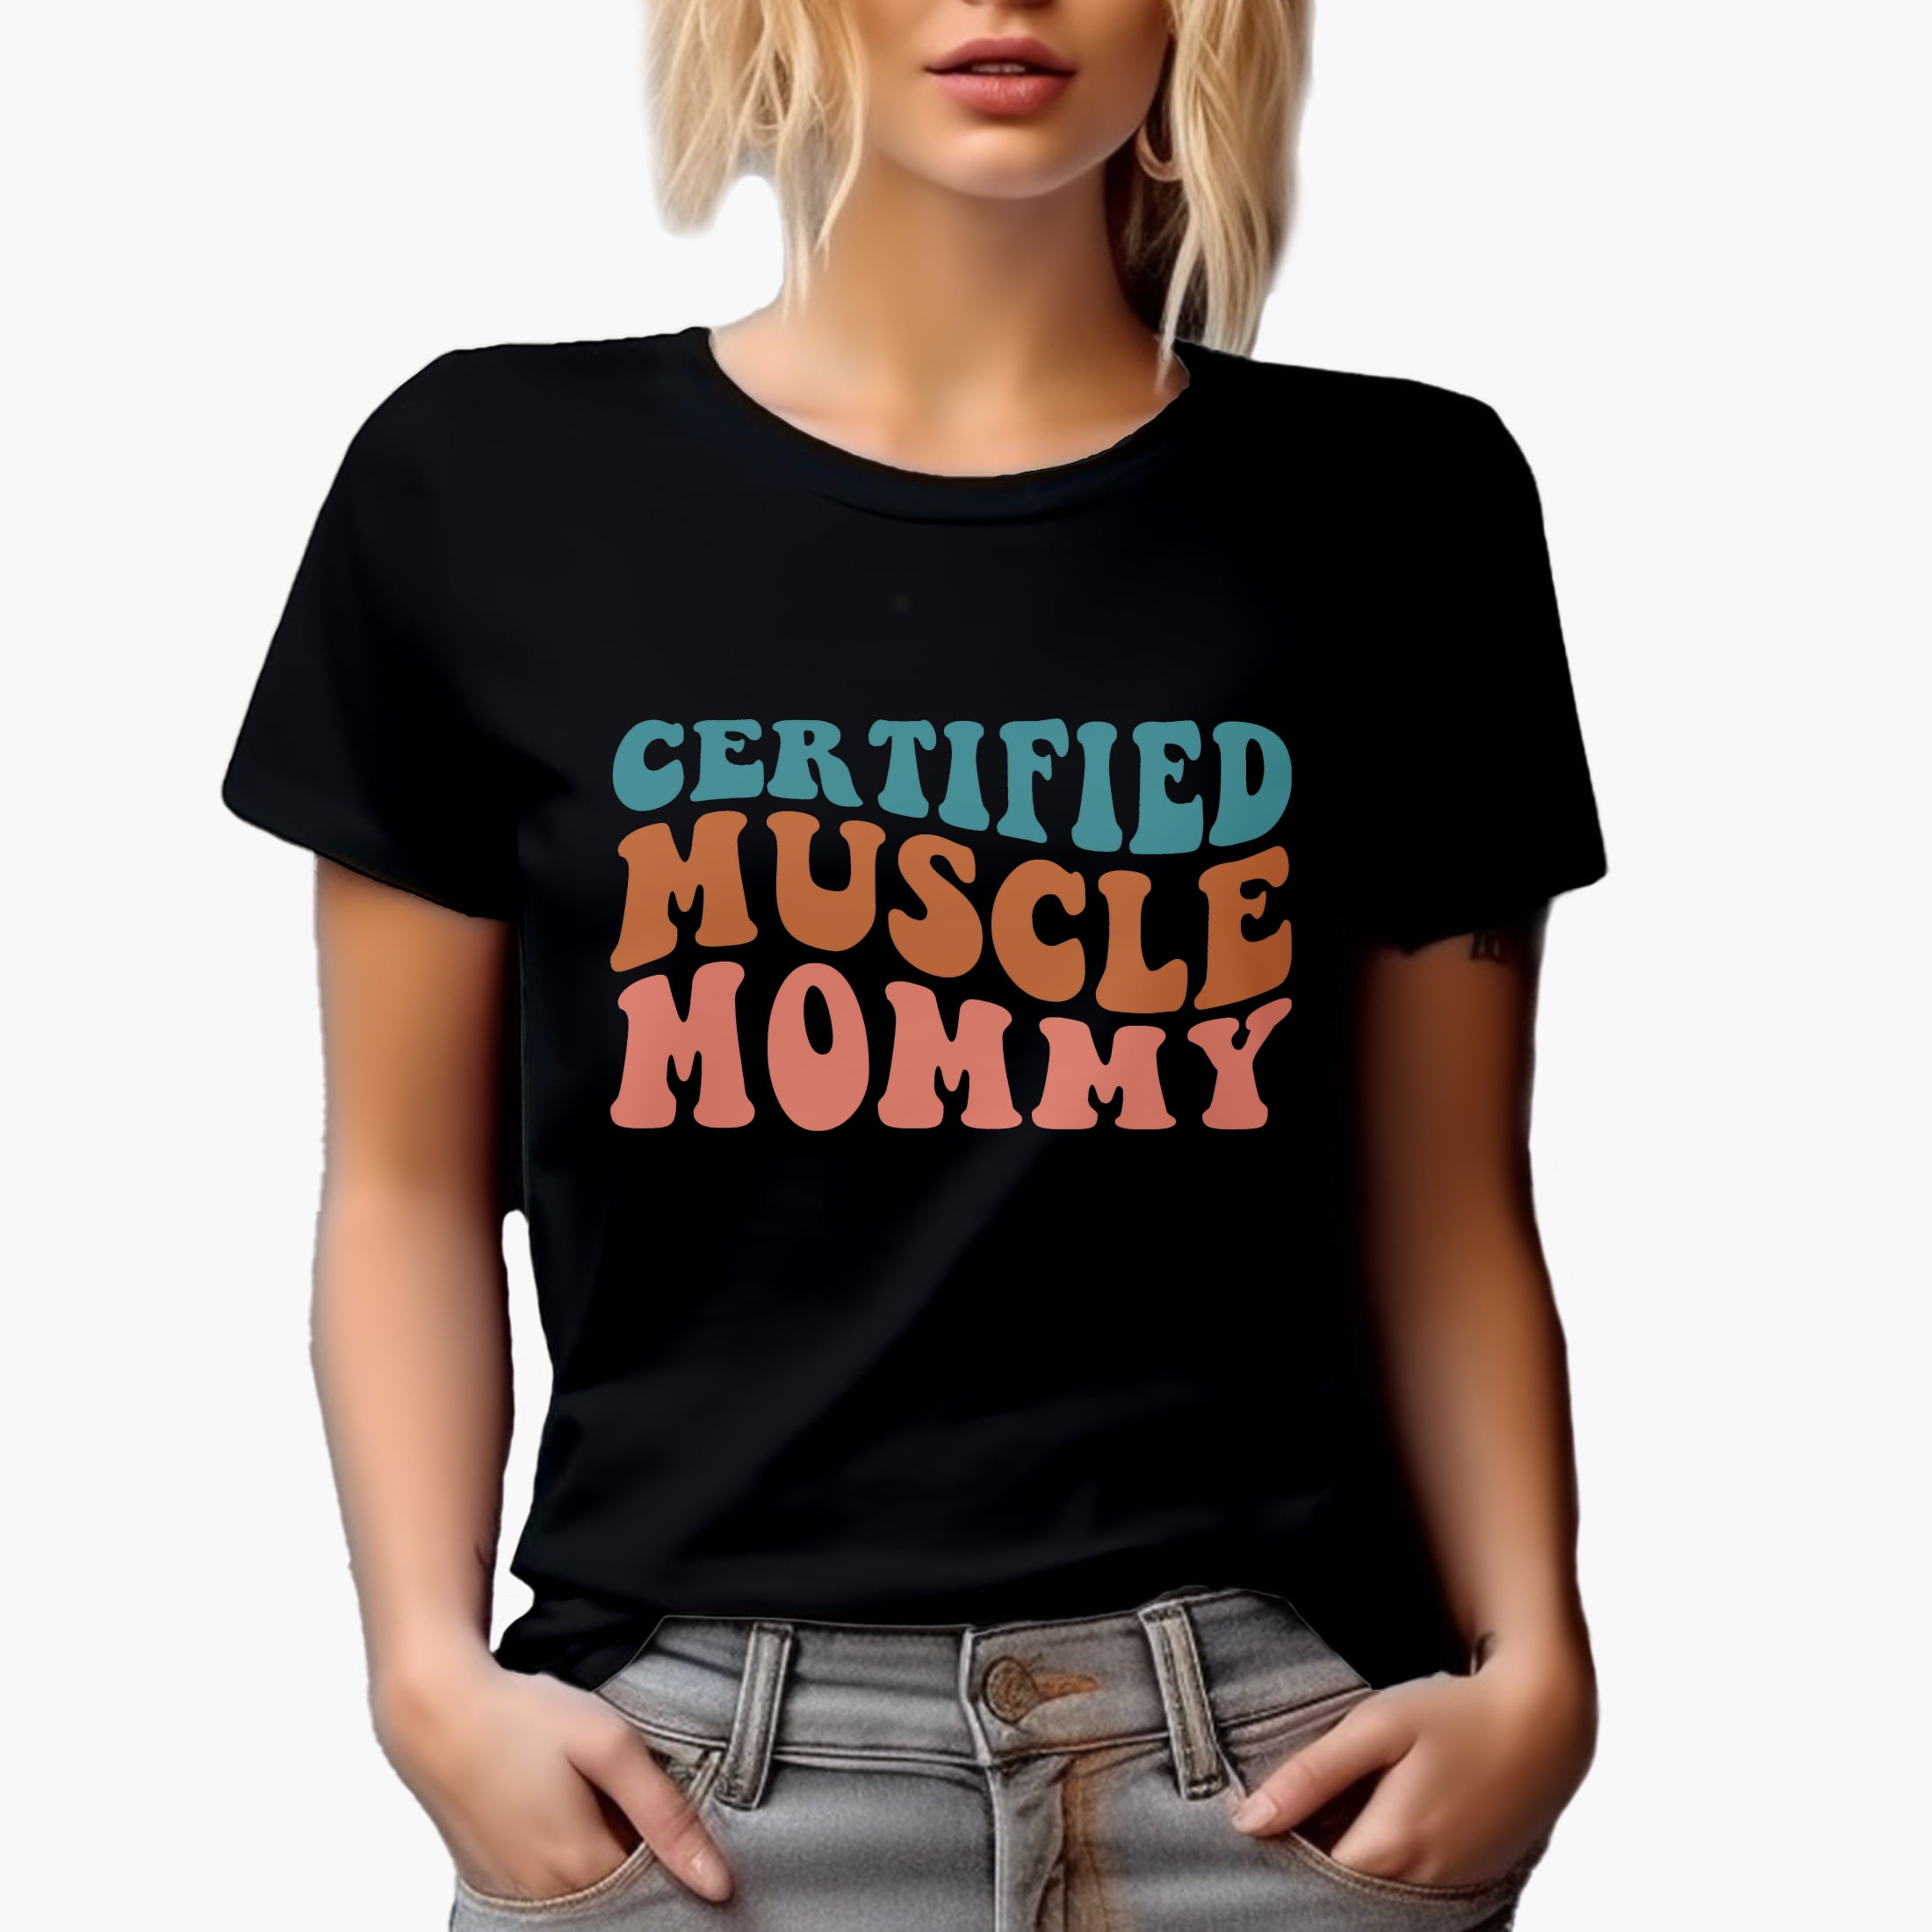 Vintage Muscle Mommy Gym Shirt, Oversized Fitness Tee for Wo